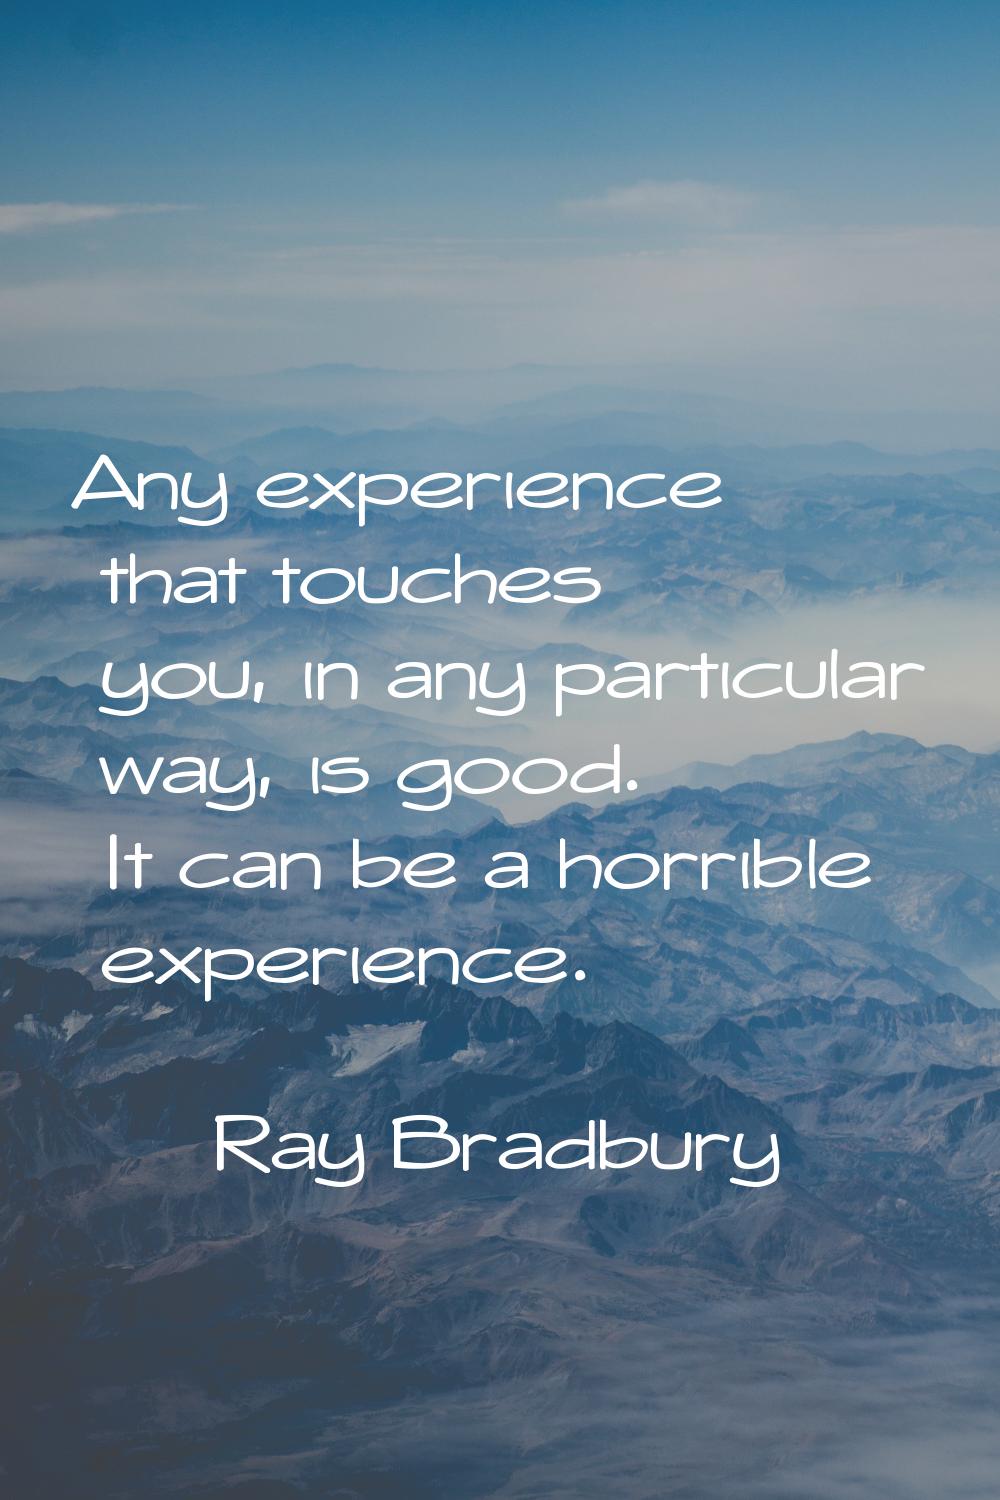 Any experience that touches you, in any particular way, is good. It can be a horrible experience.